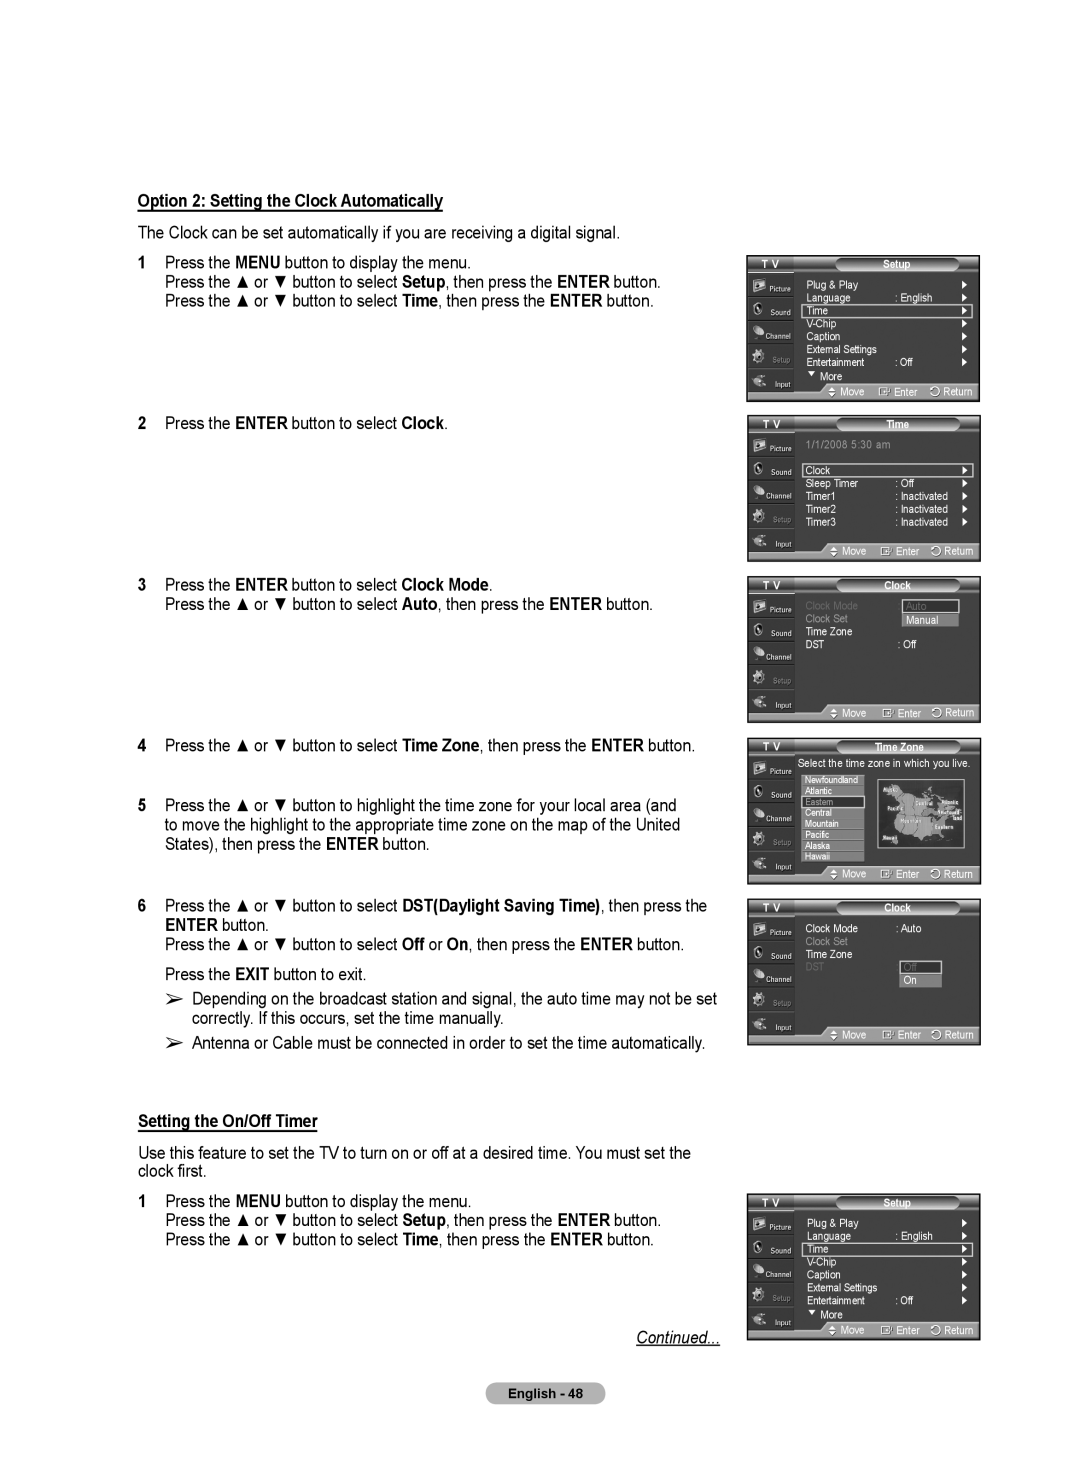 Samsung 460 user manual Option 2 Setting the Clock Automatically, Setting the On/Off Timer, Continued, AutoAuto 